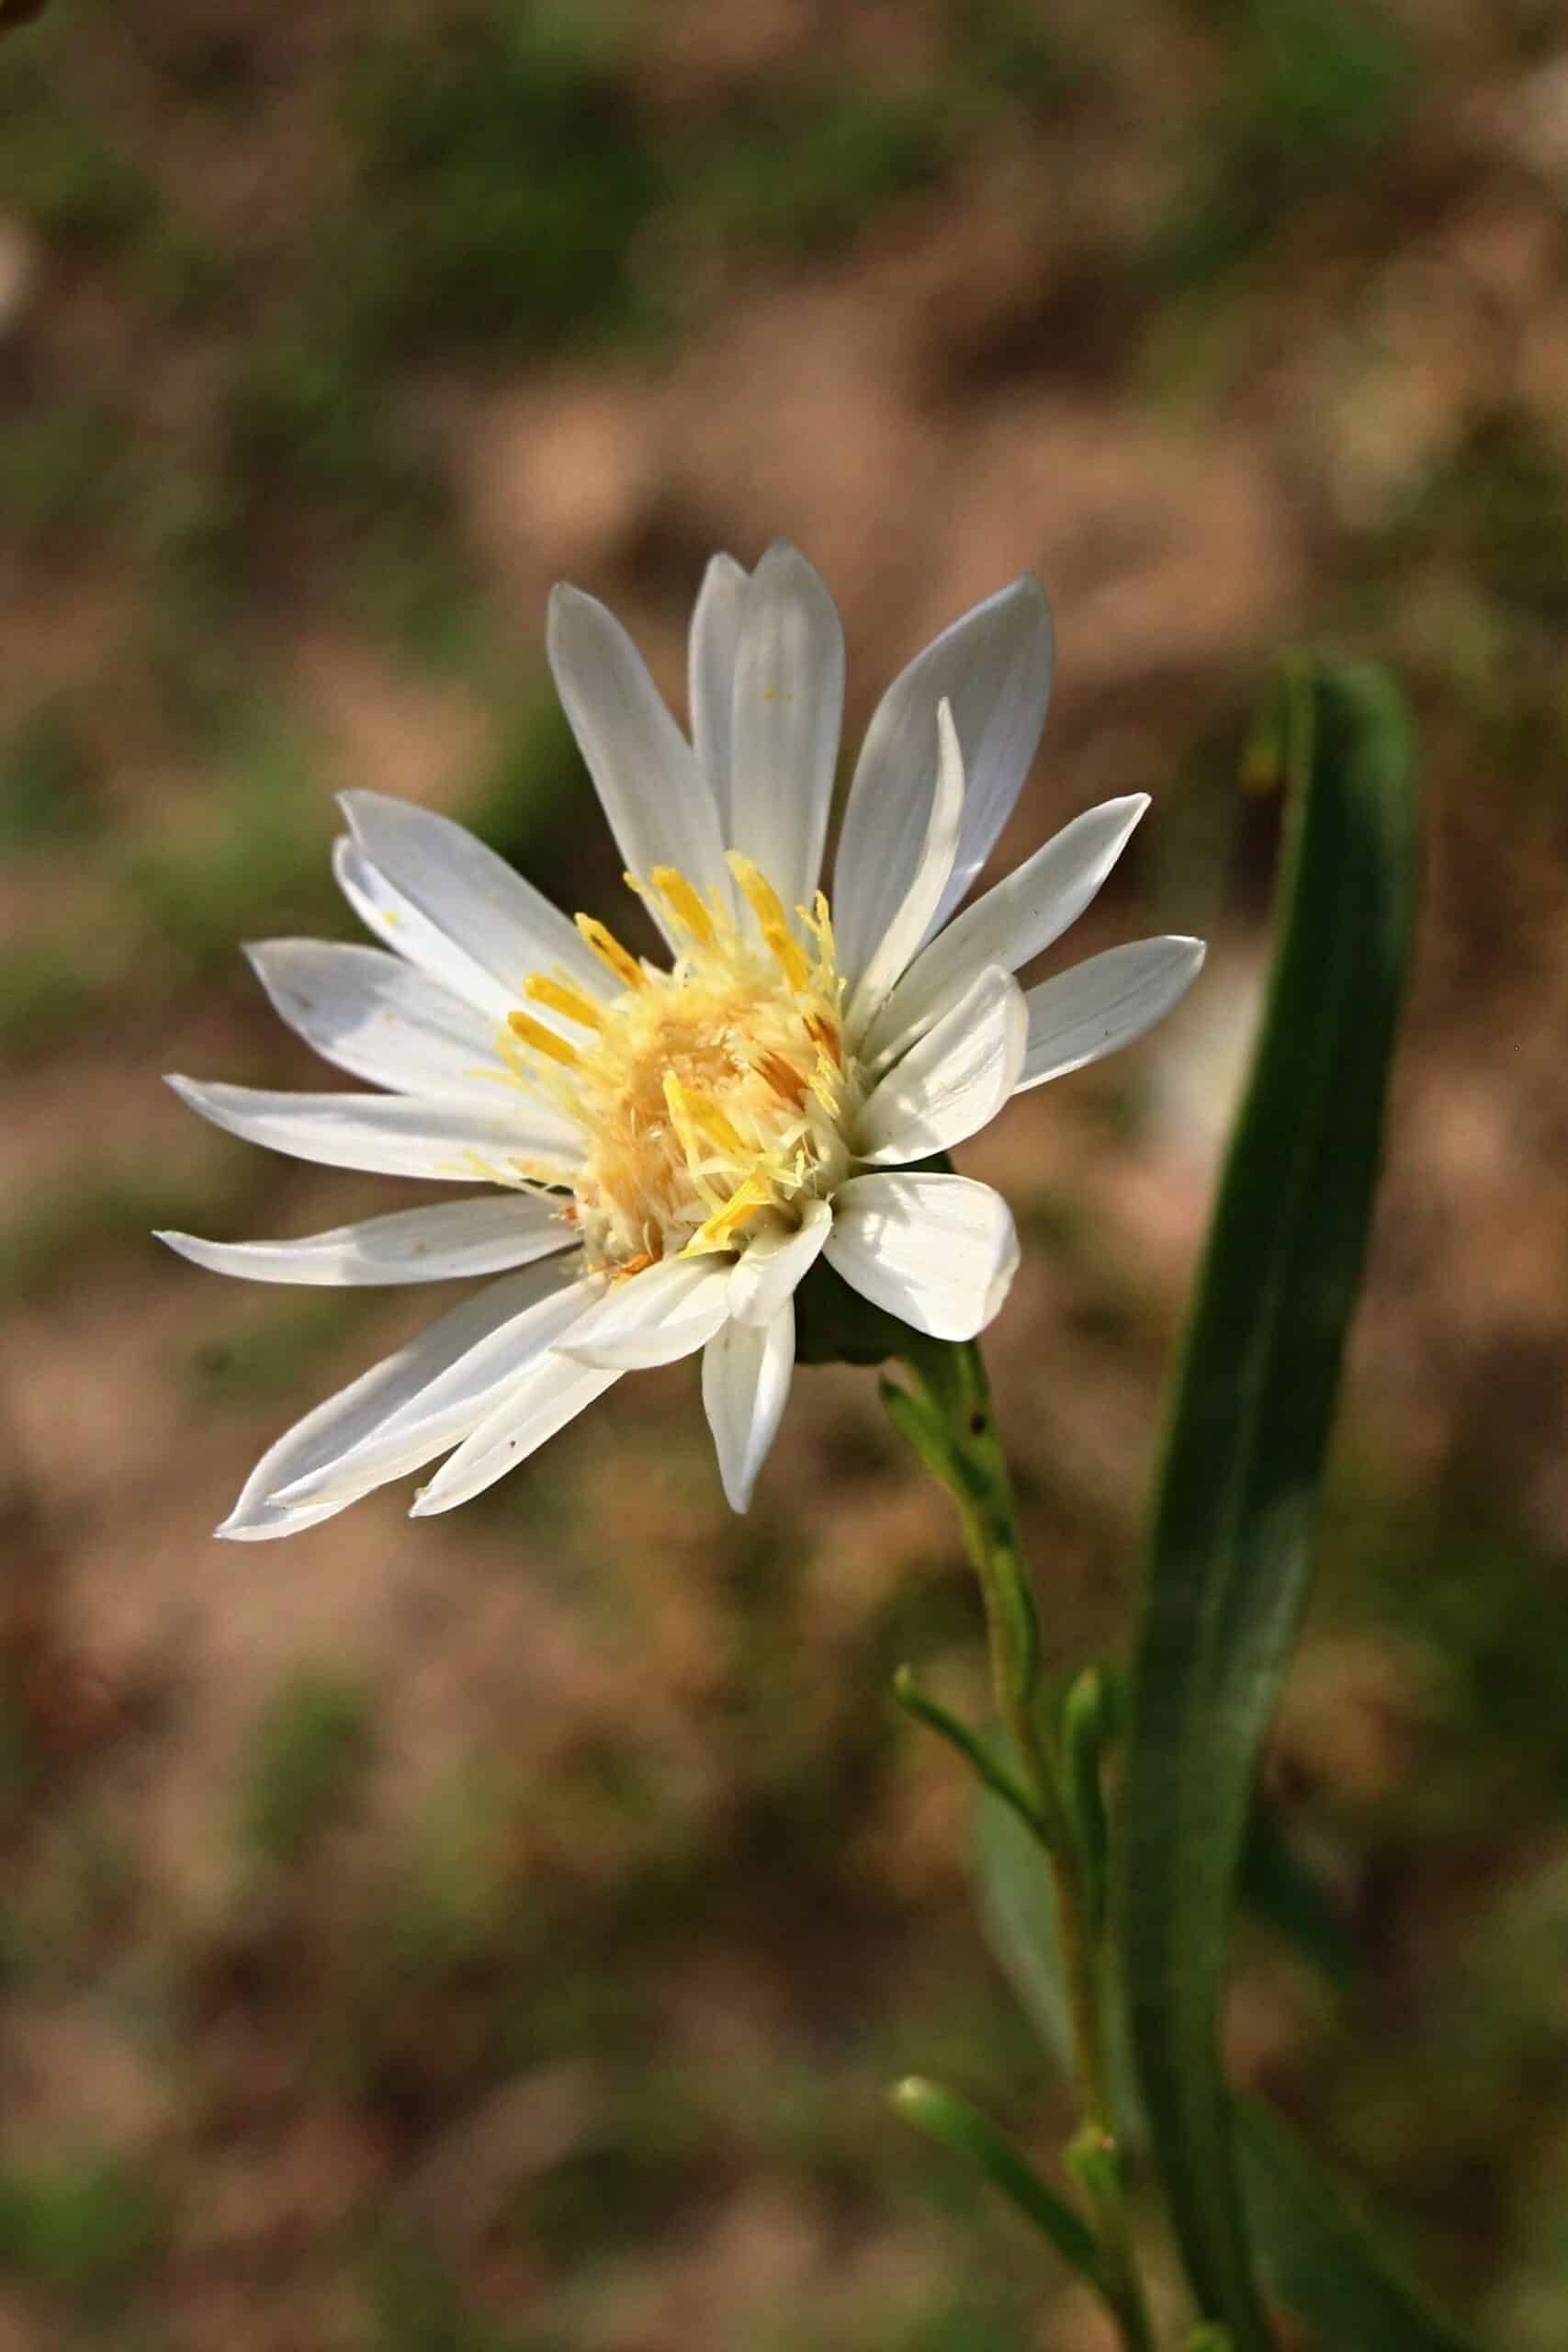 A white flower with yellow centers, perfect for fall planting.